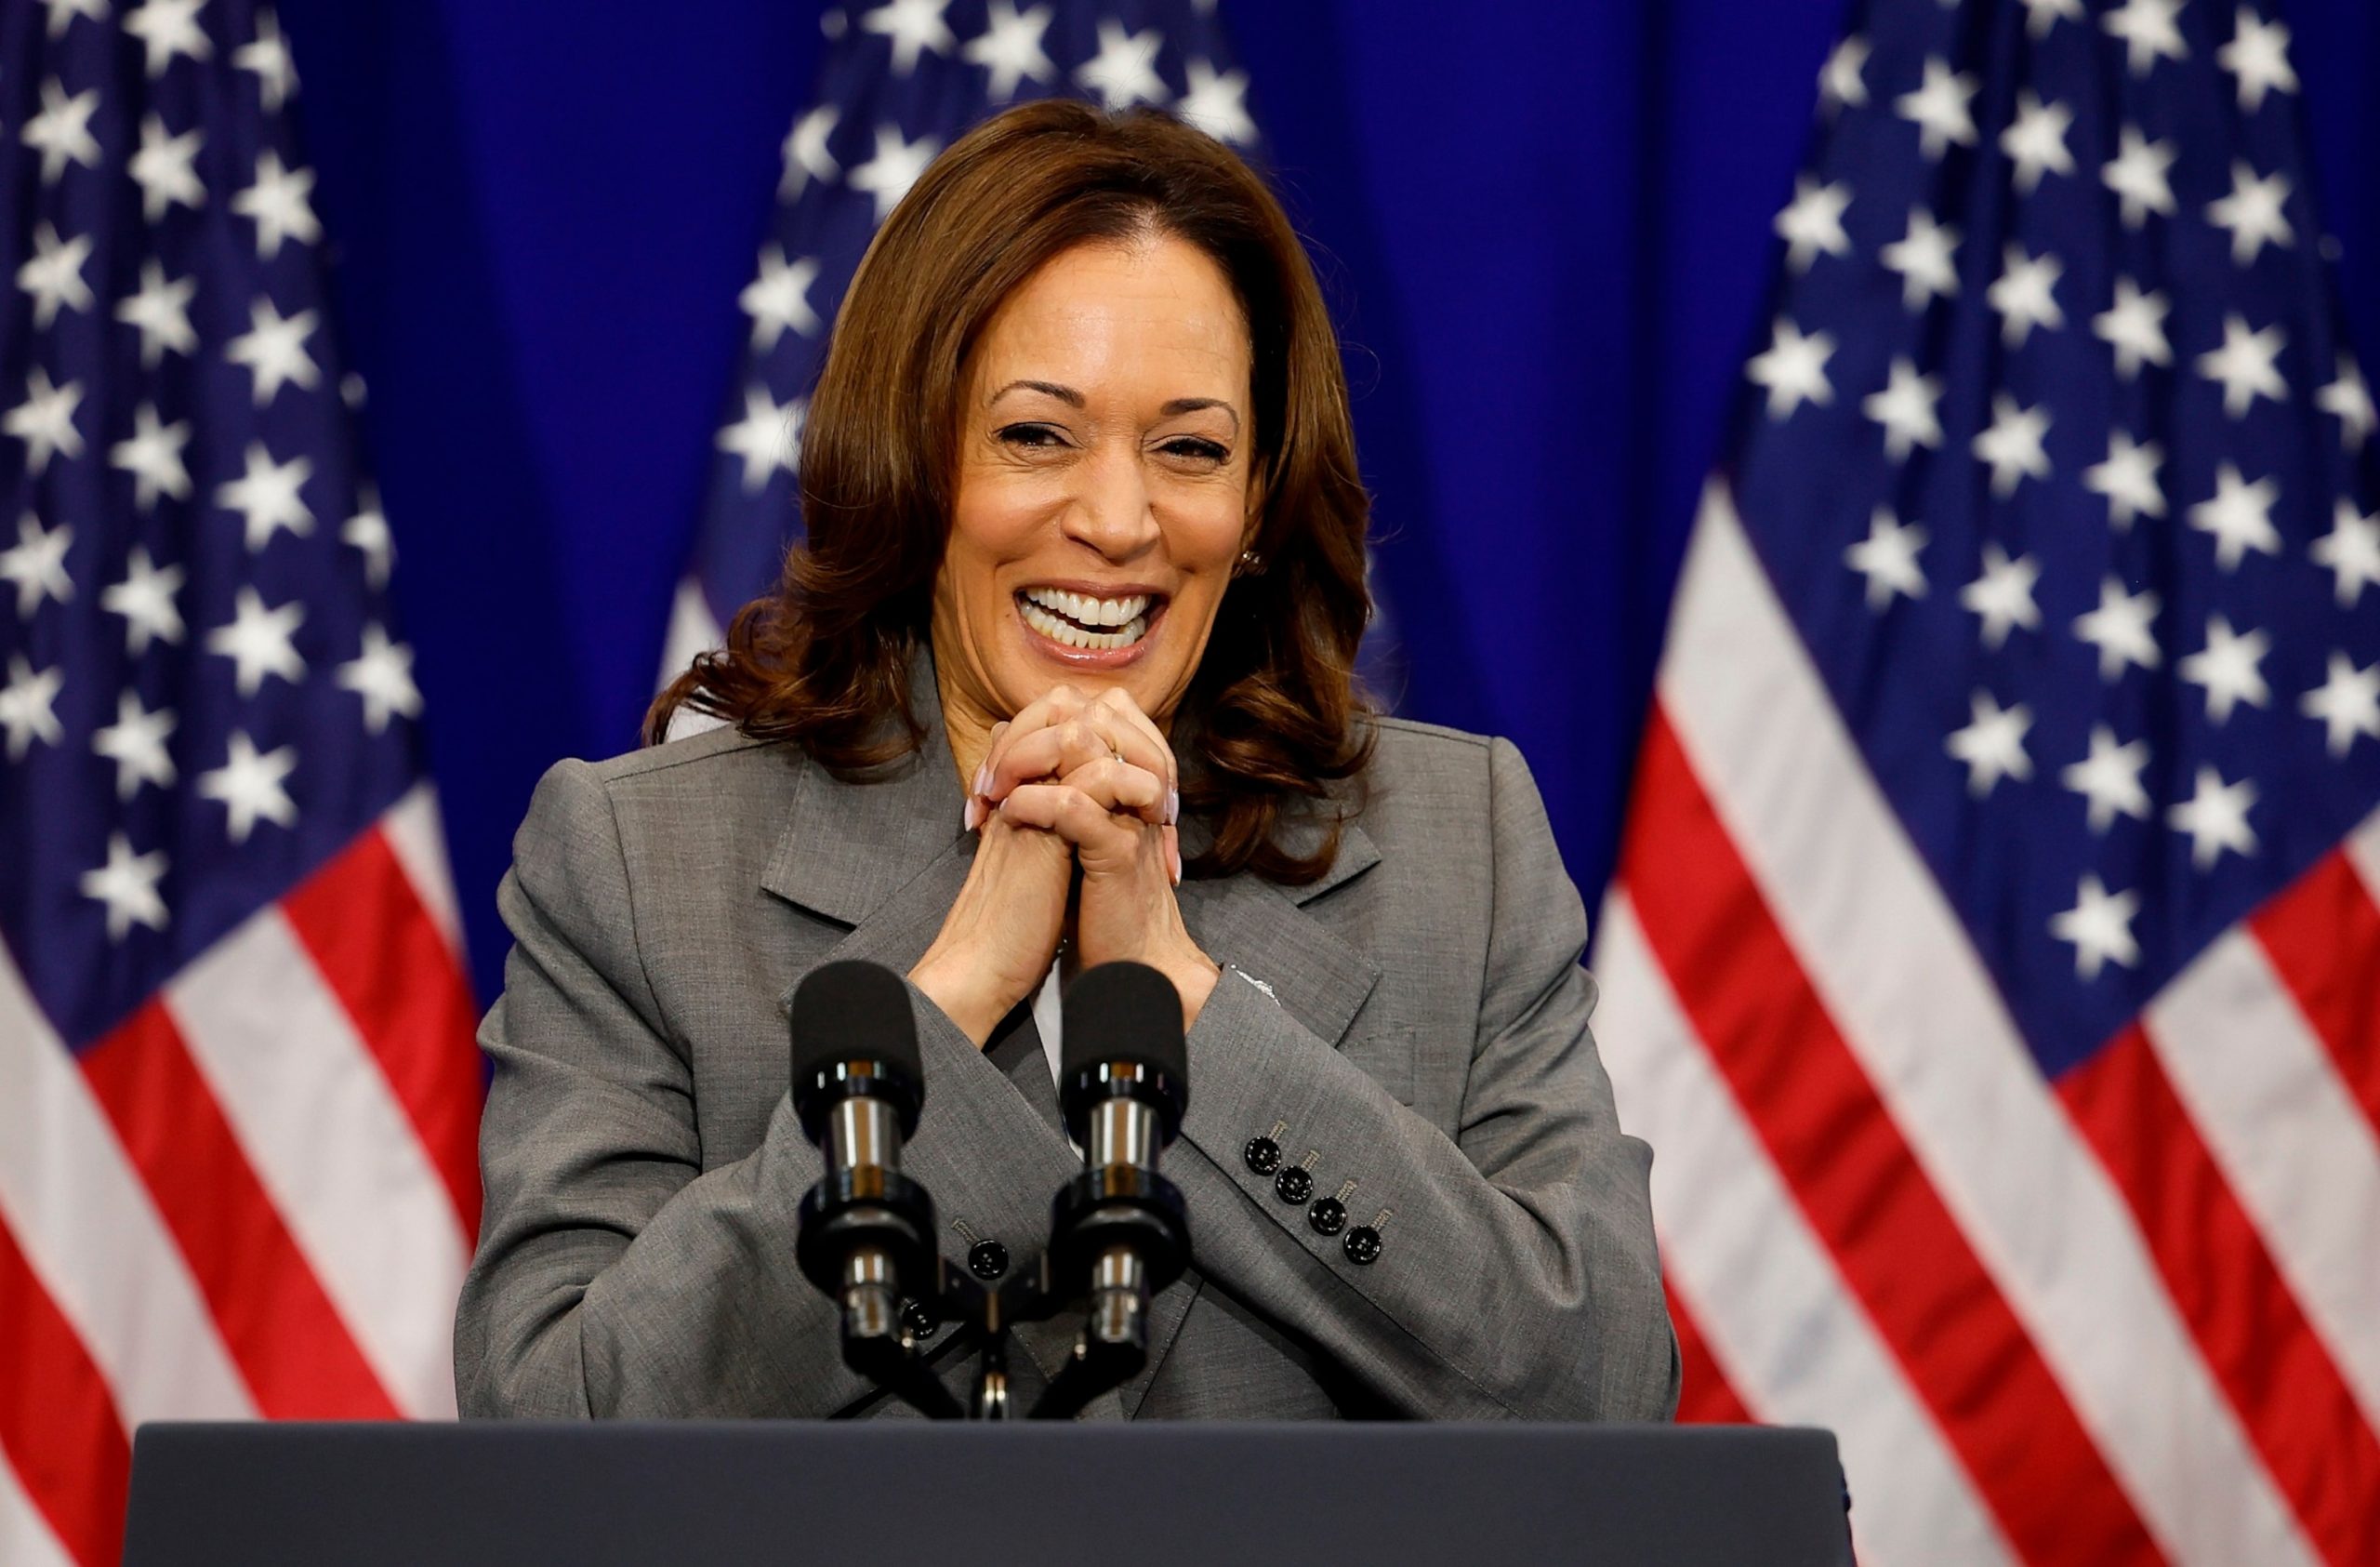 Potential Replacements for Biden and Harris' Polling Numbers Against Trump